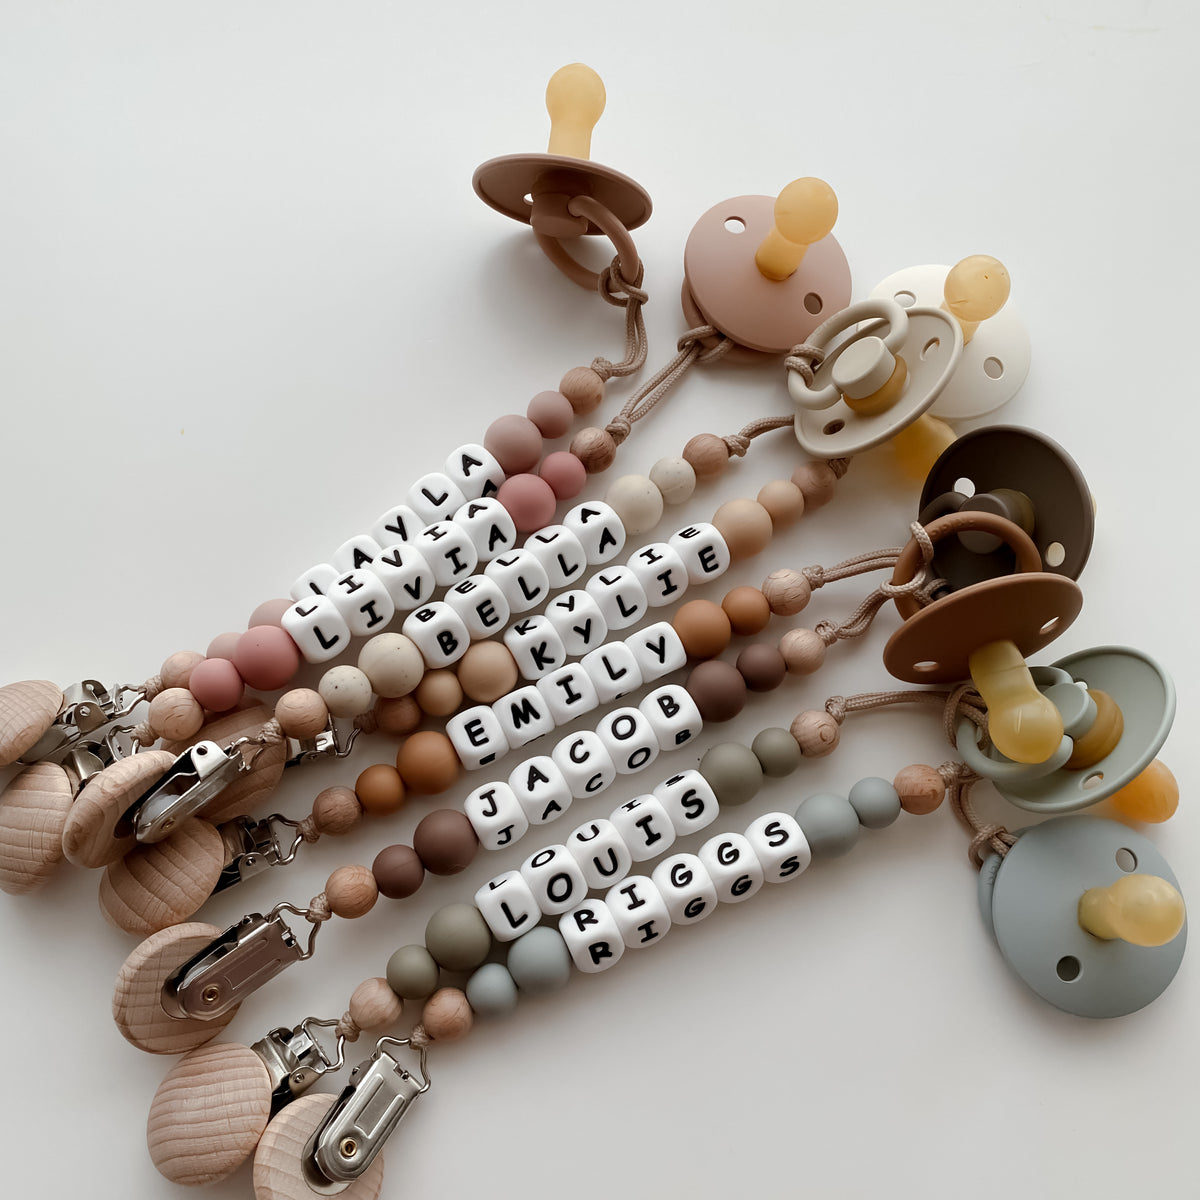 Personalized Pacifier Clip – Oatmilk Baby